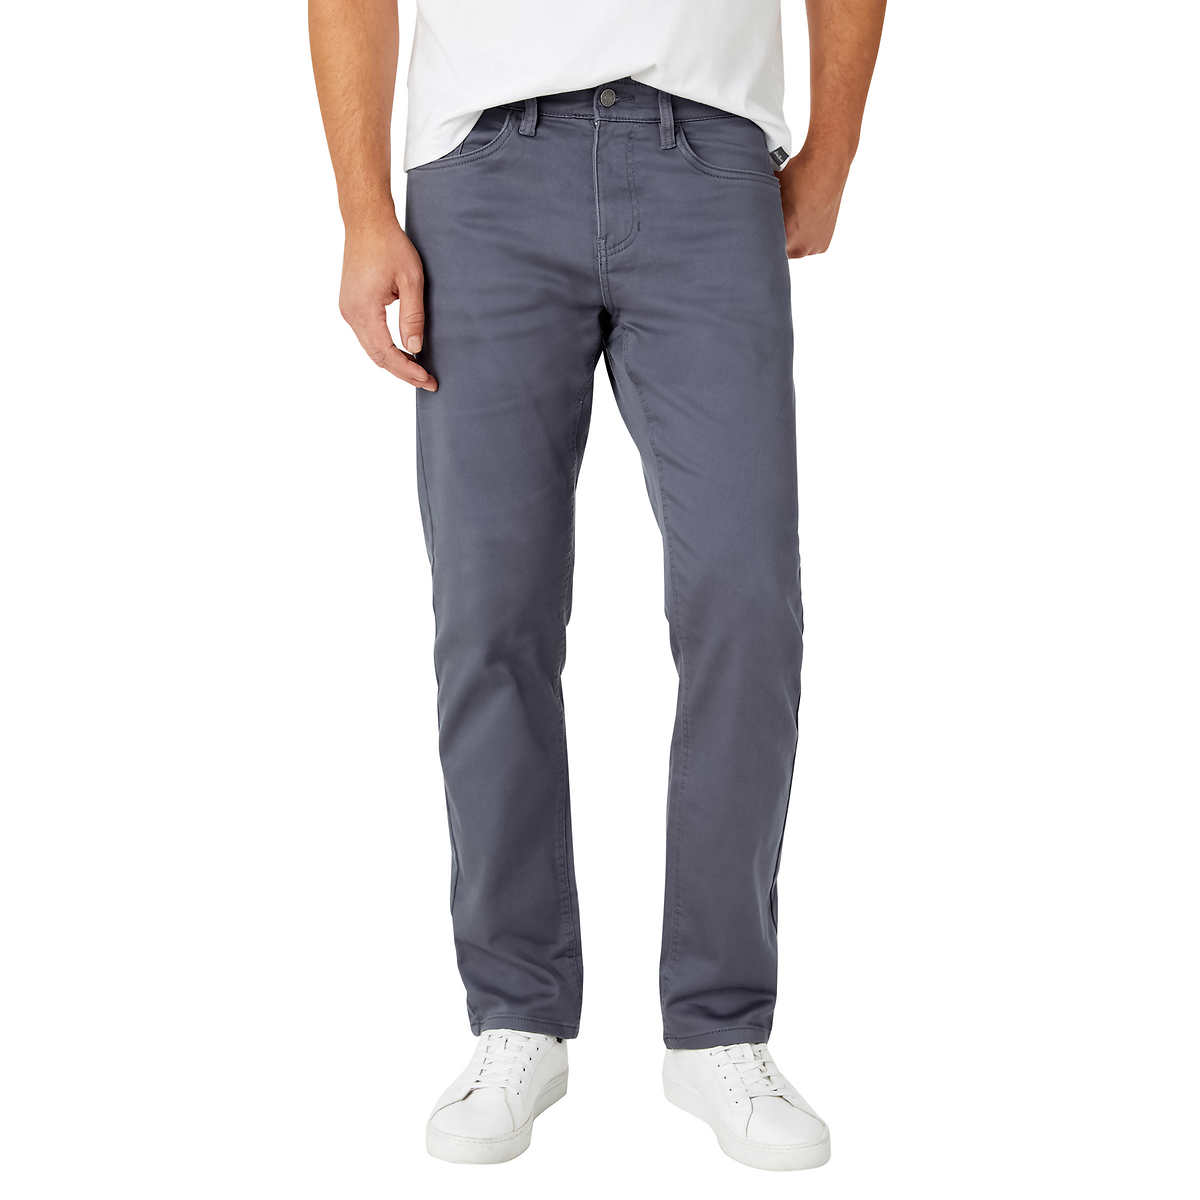 Stretched Slim Fit Pants Sits at Waist Trousers with 5 Jeans for Men Pockets